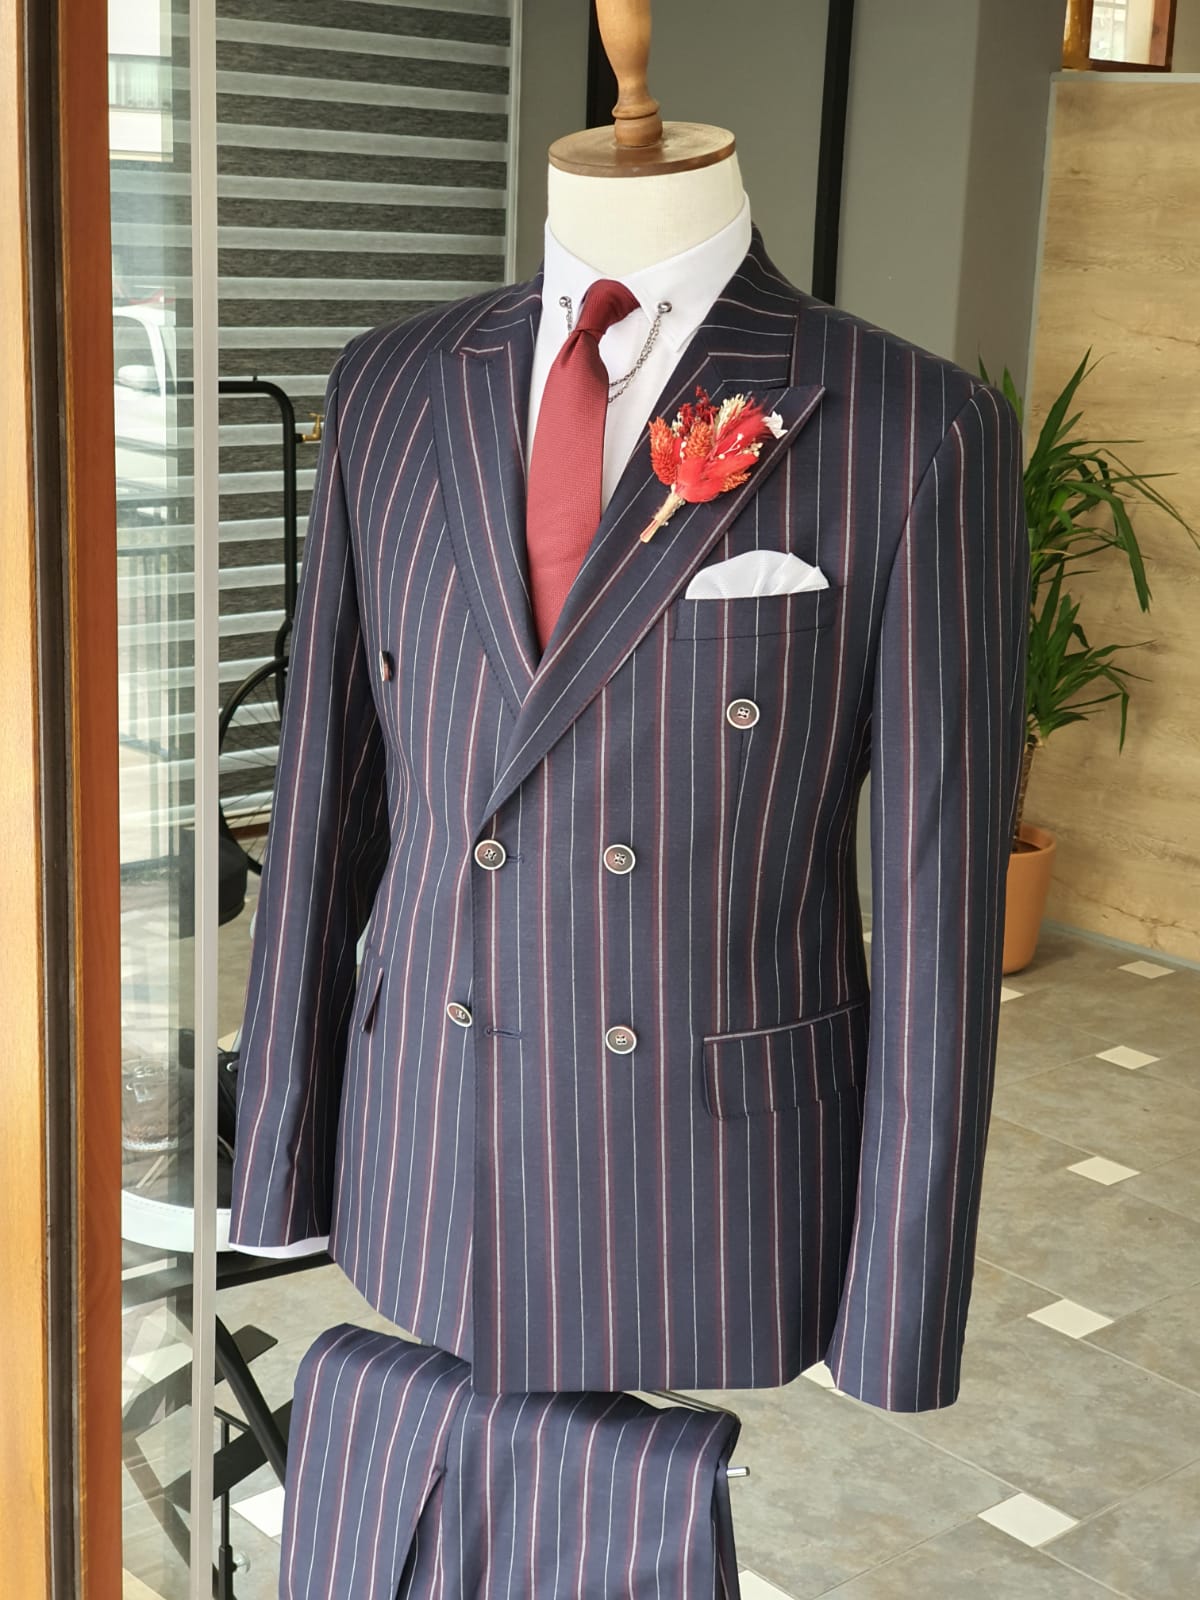 NAVYBLUE & CLARET-RED DAPPER DOUBLE BREASTED SUIT